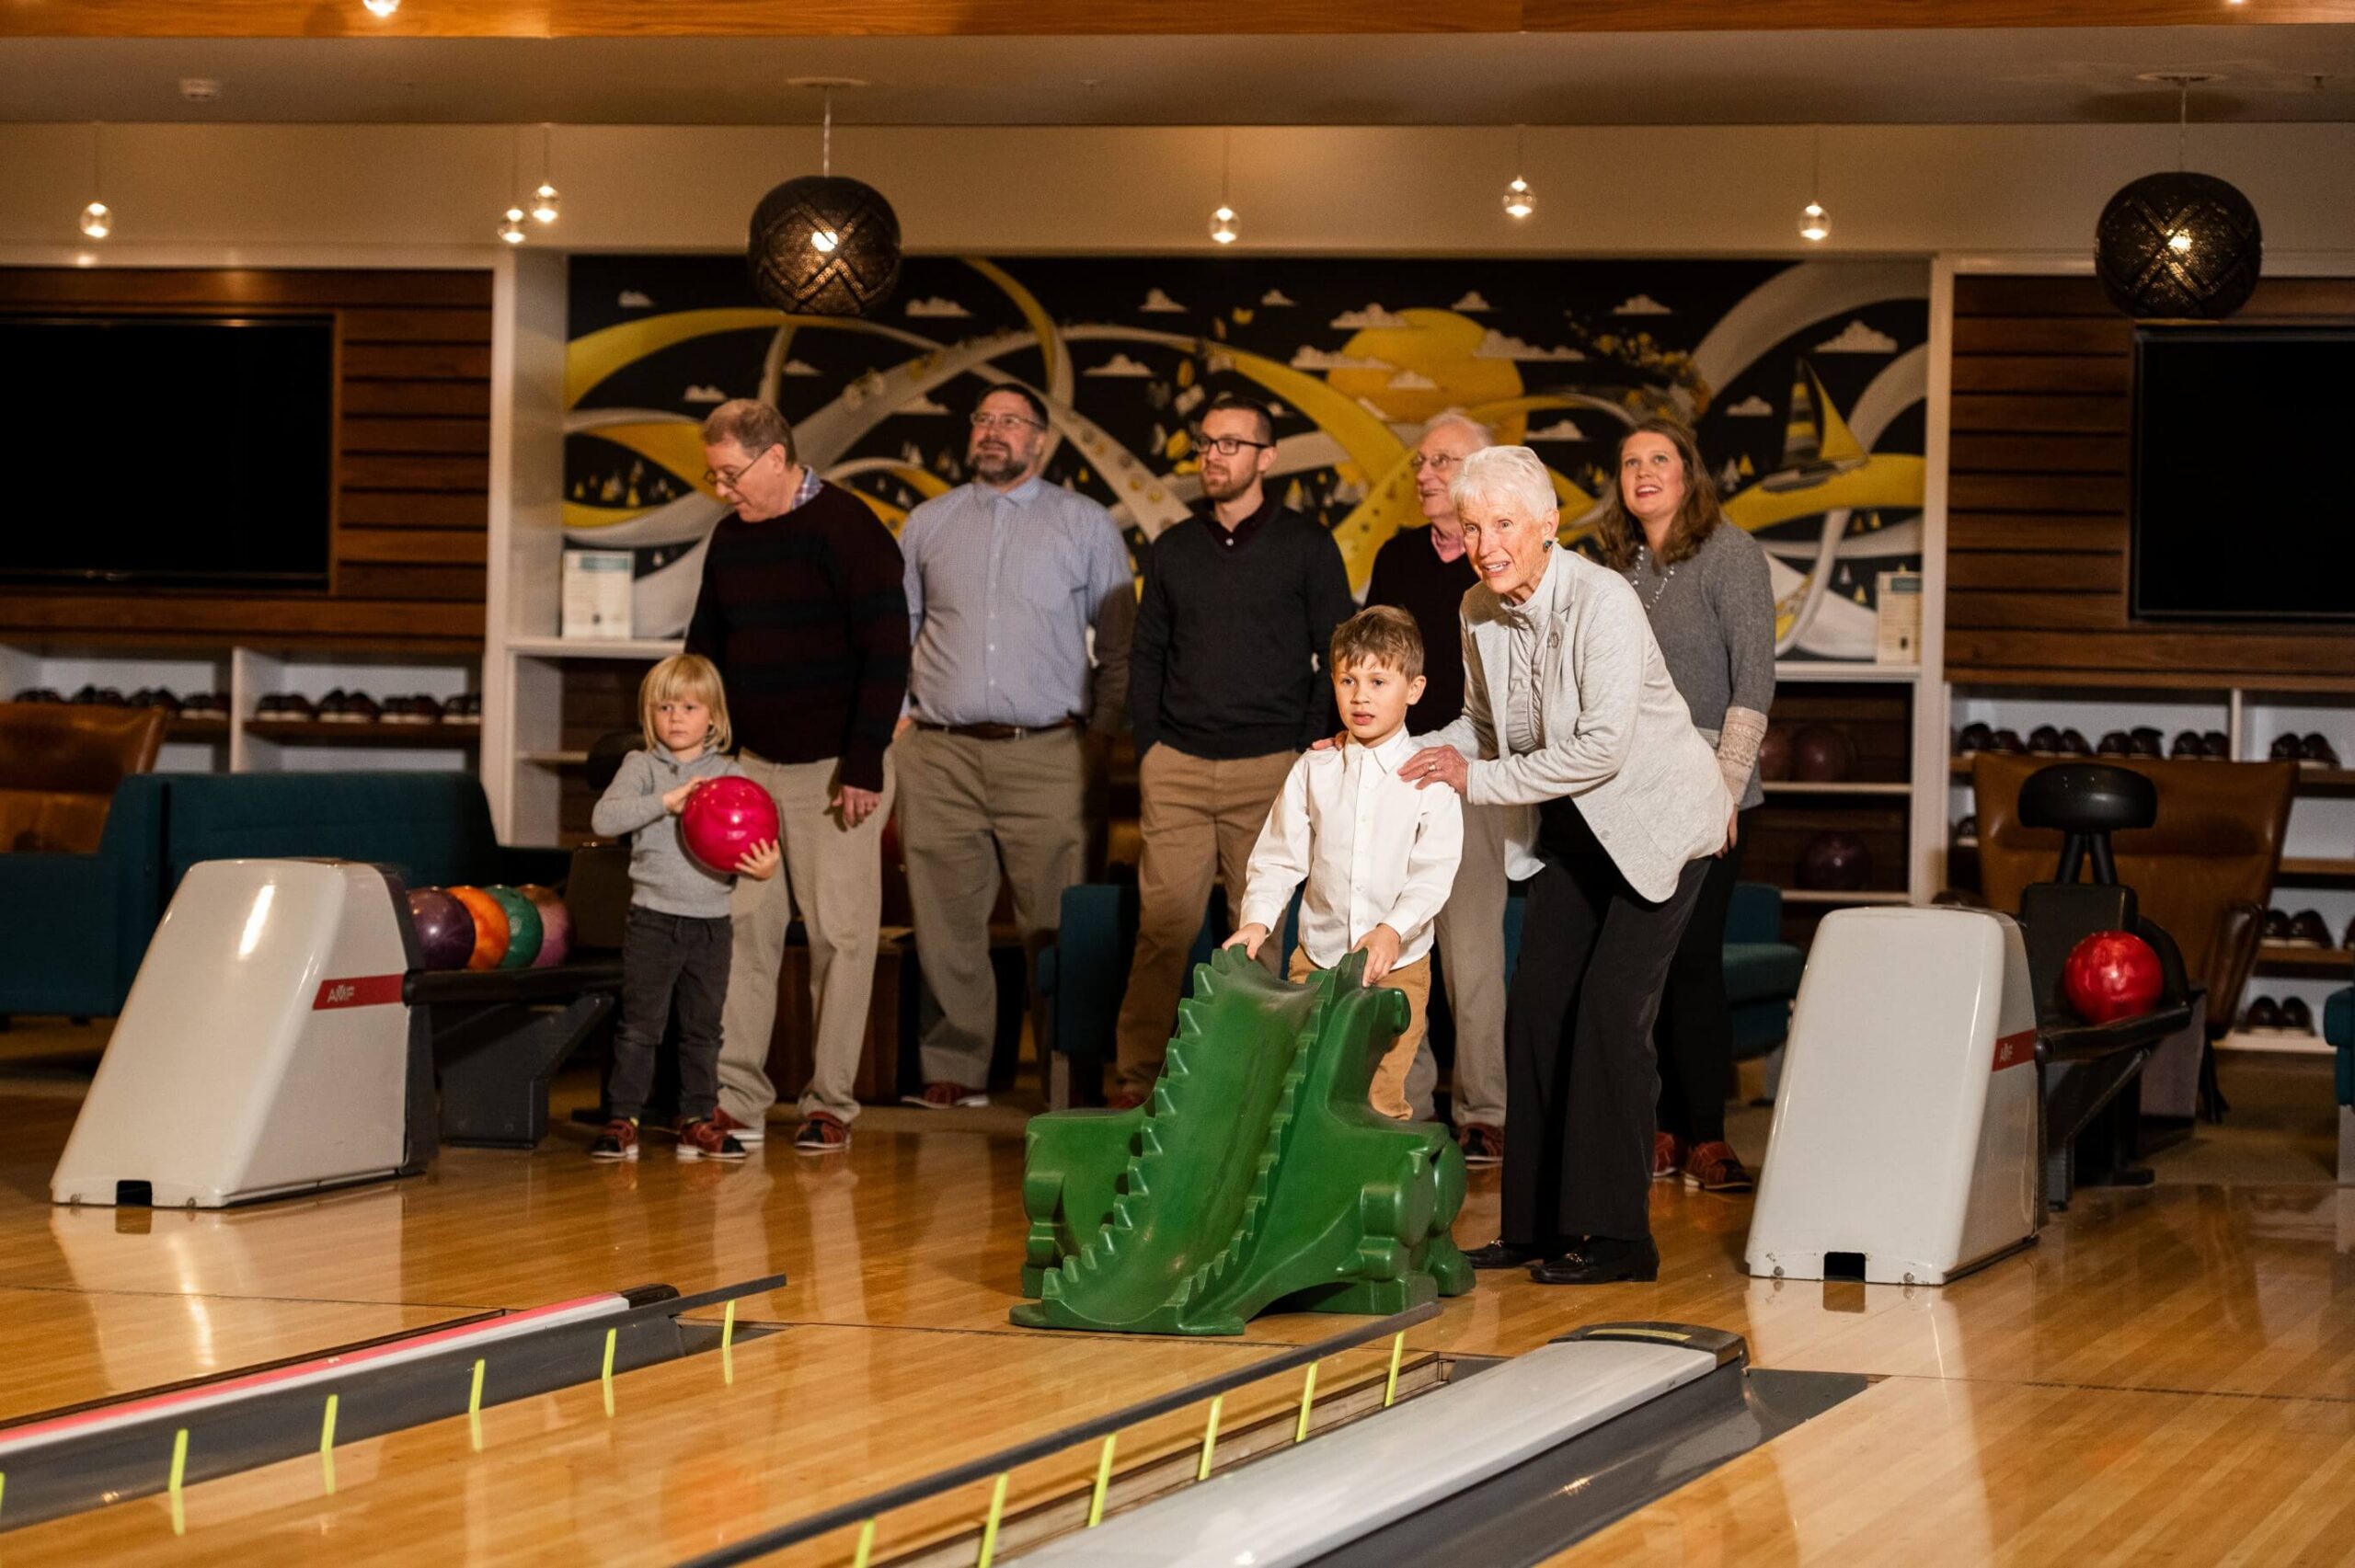 A group of seniors enjoying a friendly bowling game in an independent living community.